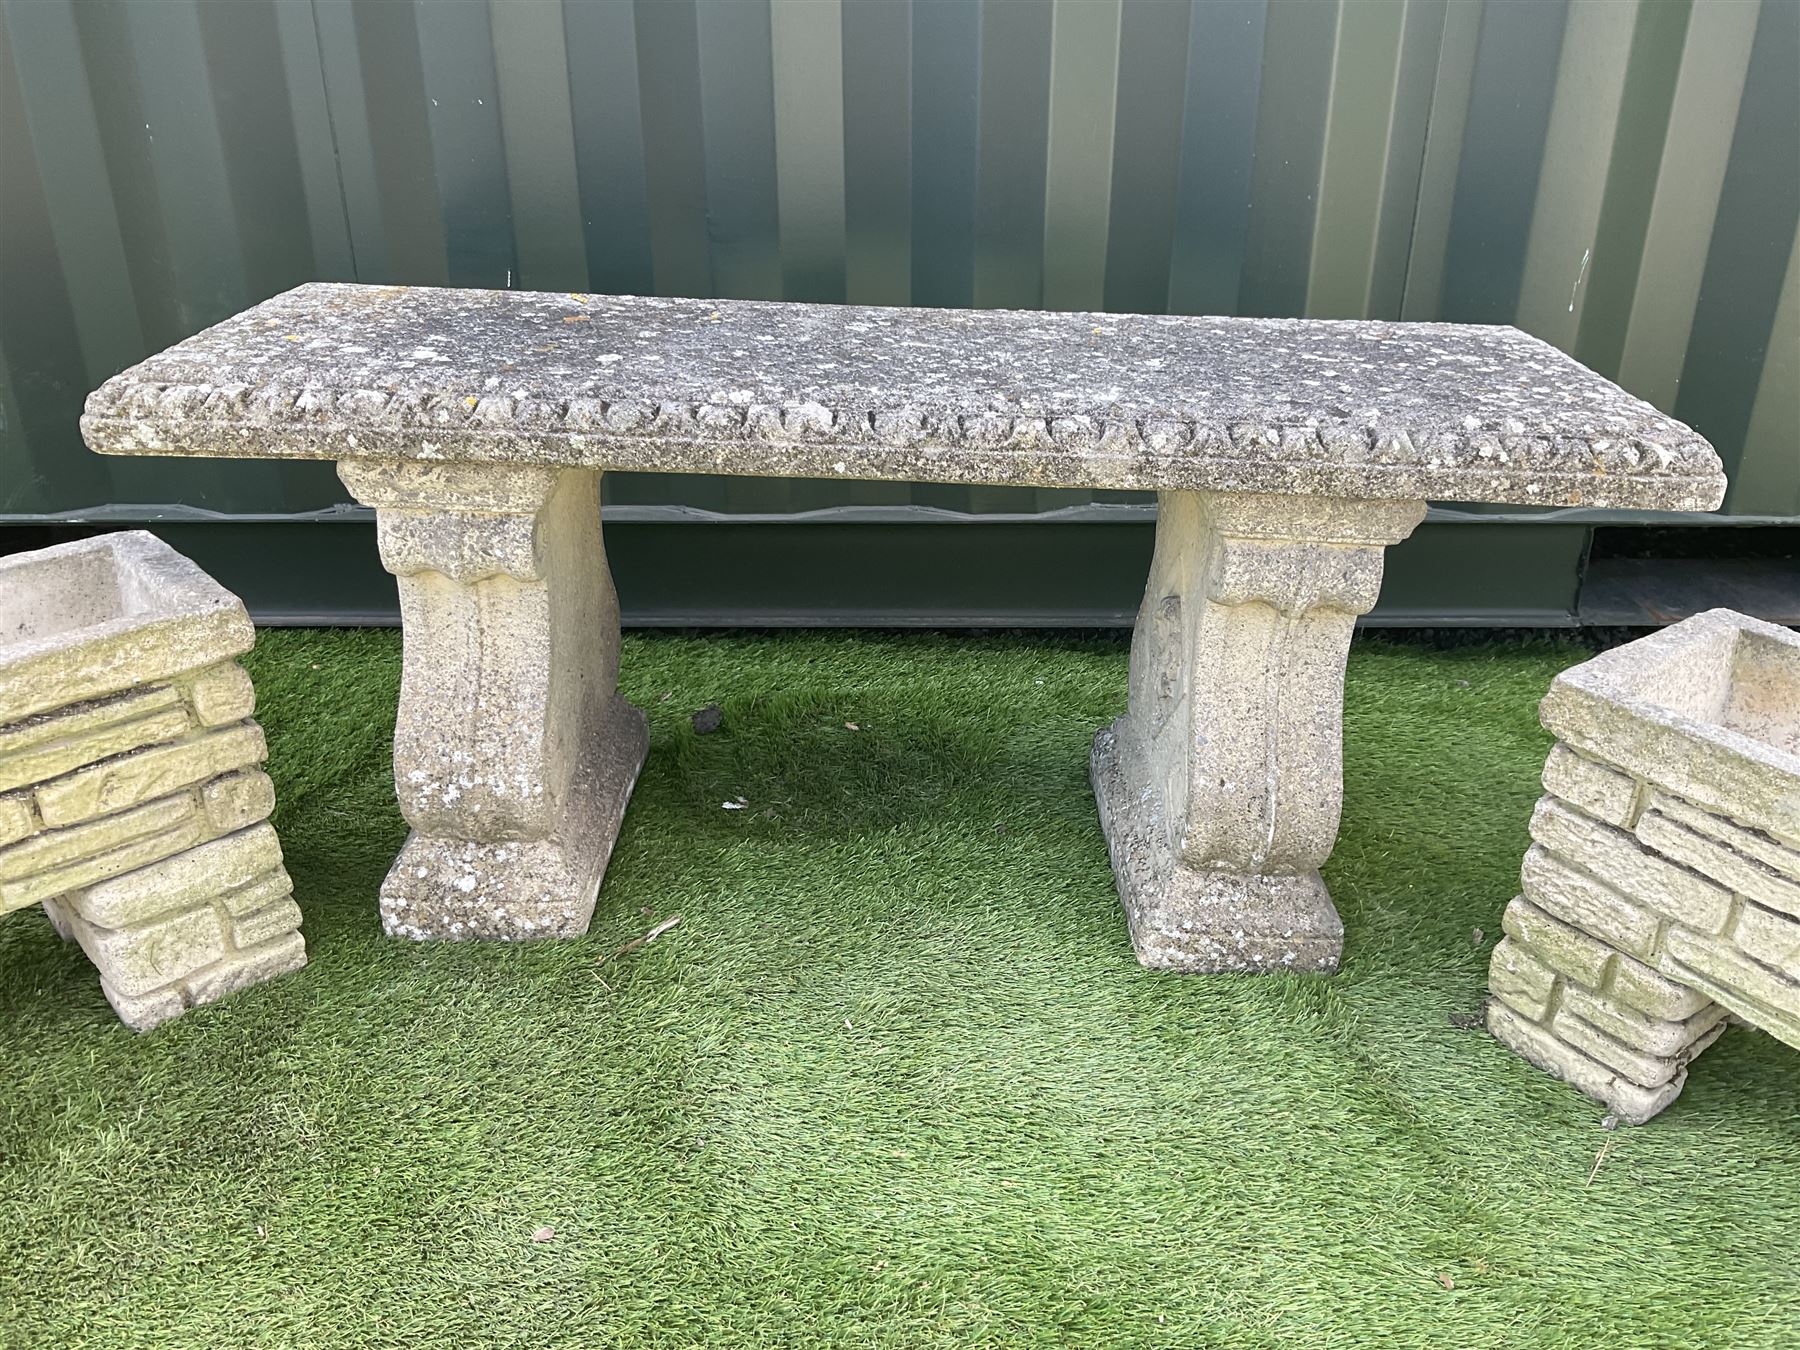 Cast stone garden bench - Image 3 of 5